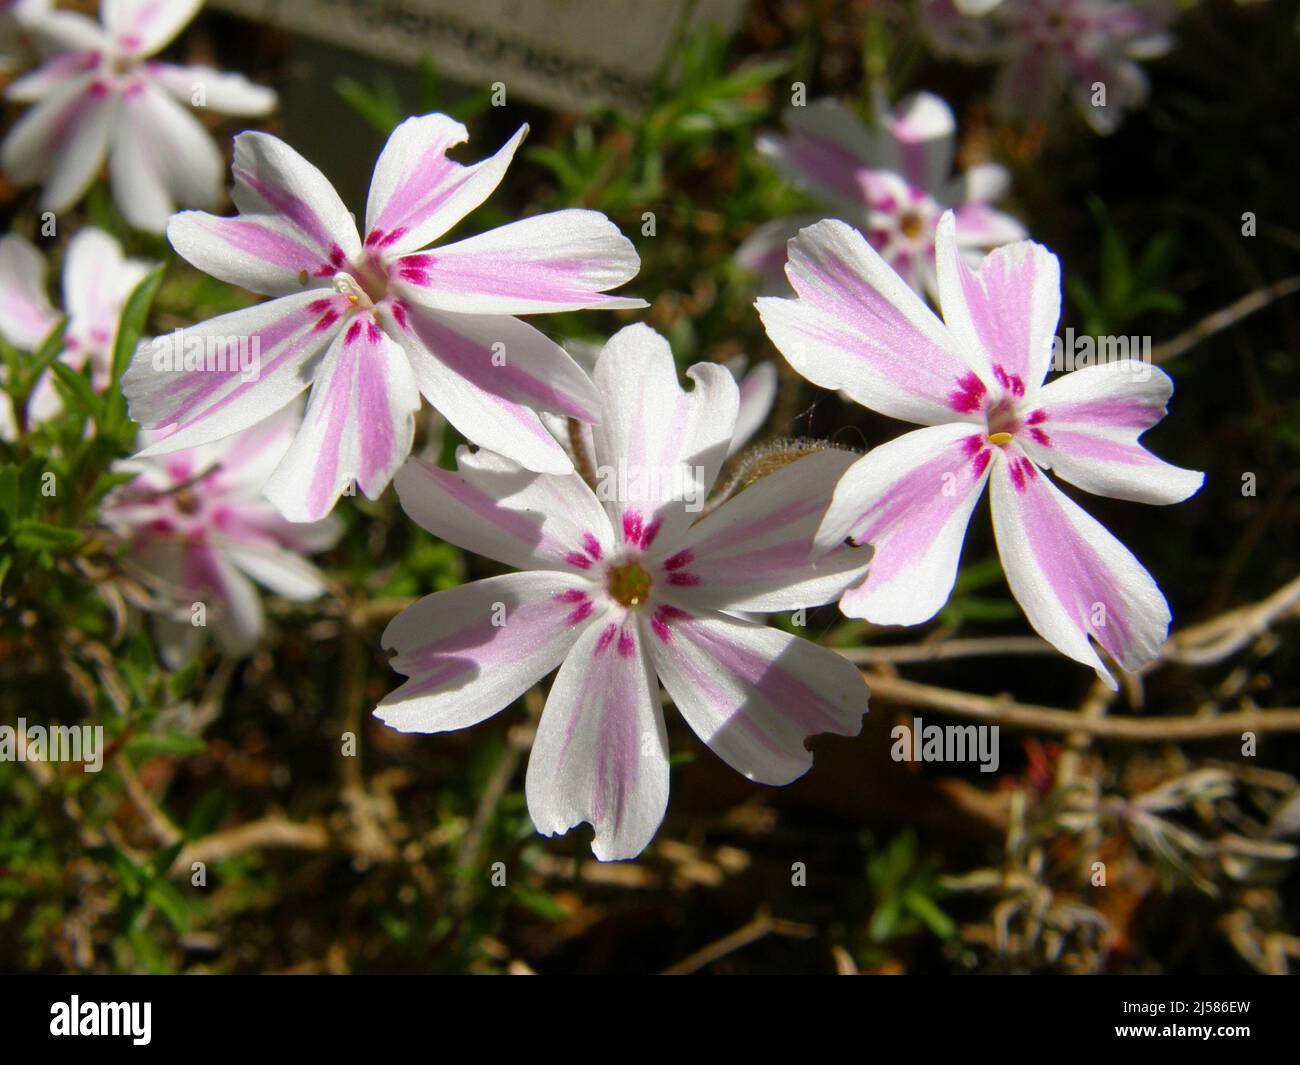 White with pink stripes moss phlox (Phlox subulata) Tamanonagalei (Mikado) bloom in a garden in May Stock Photo